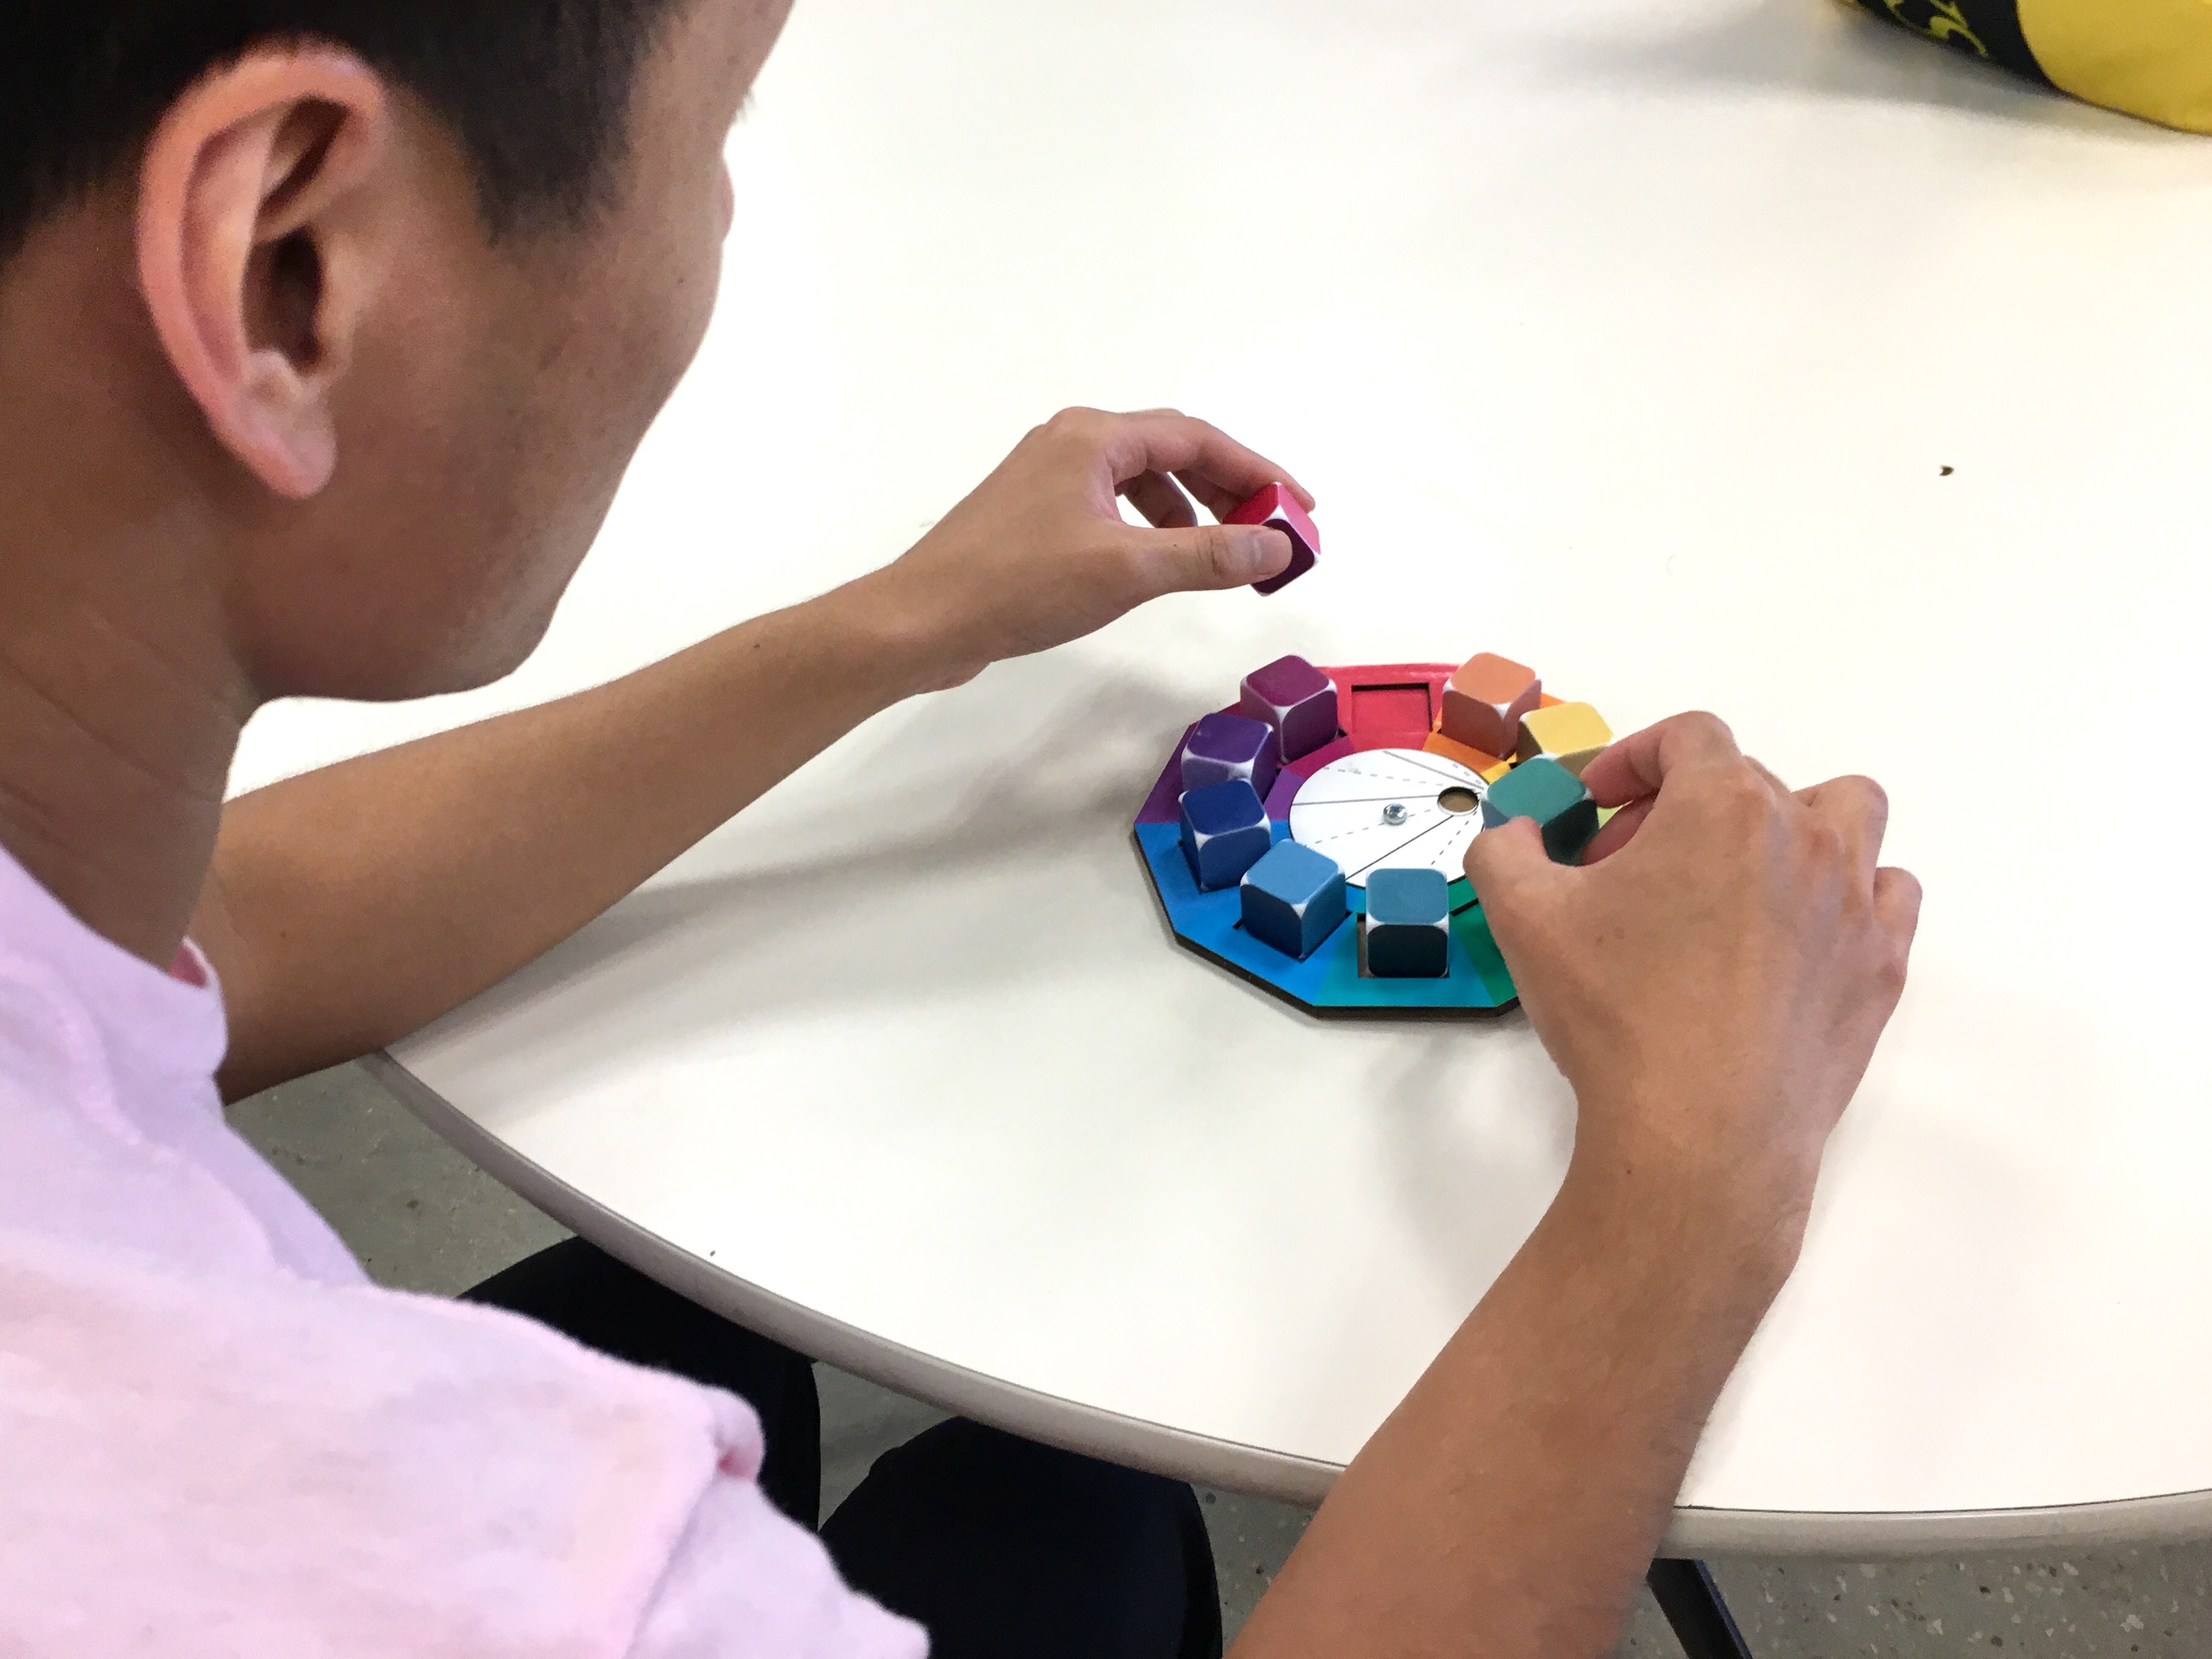 A person picks up colorful dice on a cardboard prototype of a spinning color wheel, testing it.